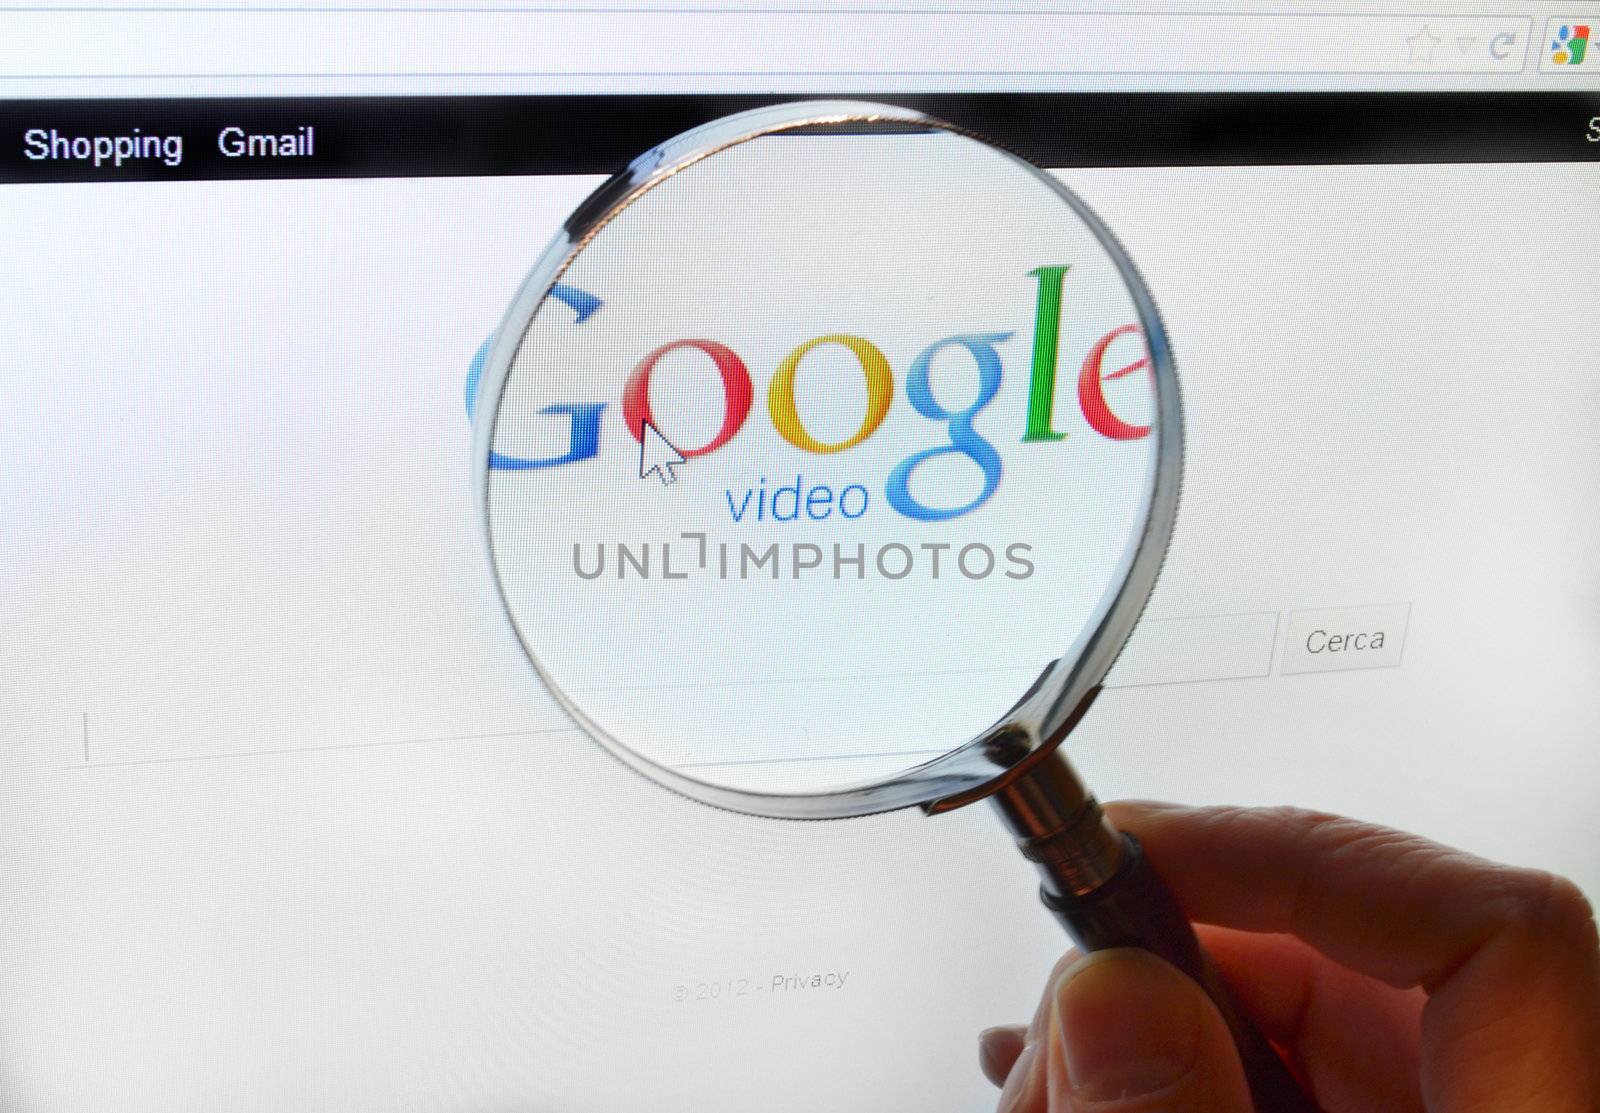 Magnifing glass over Google Video page